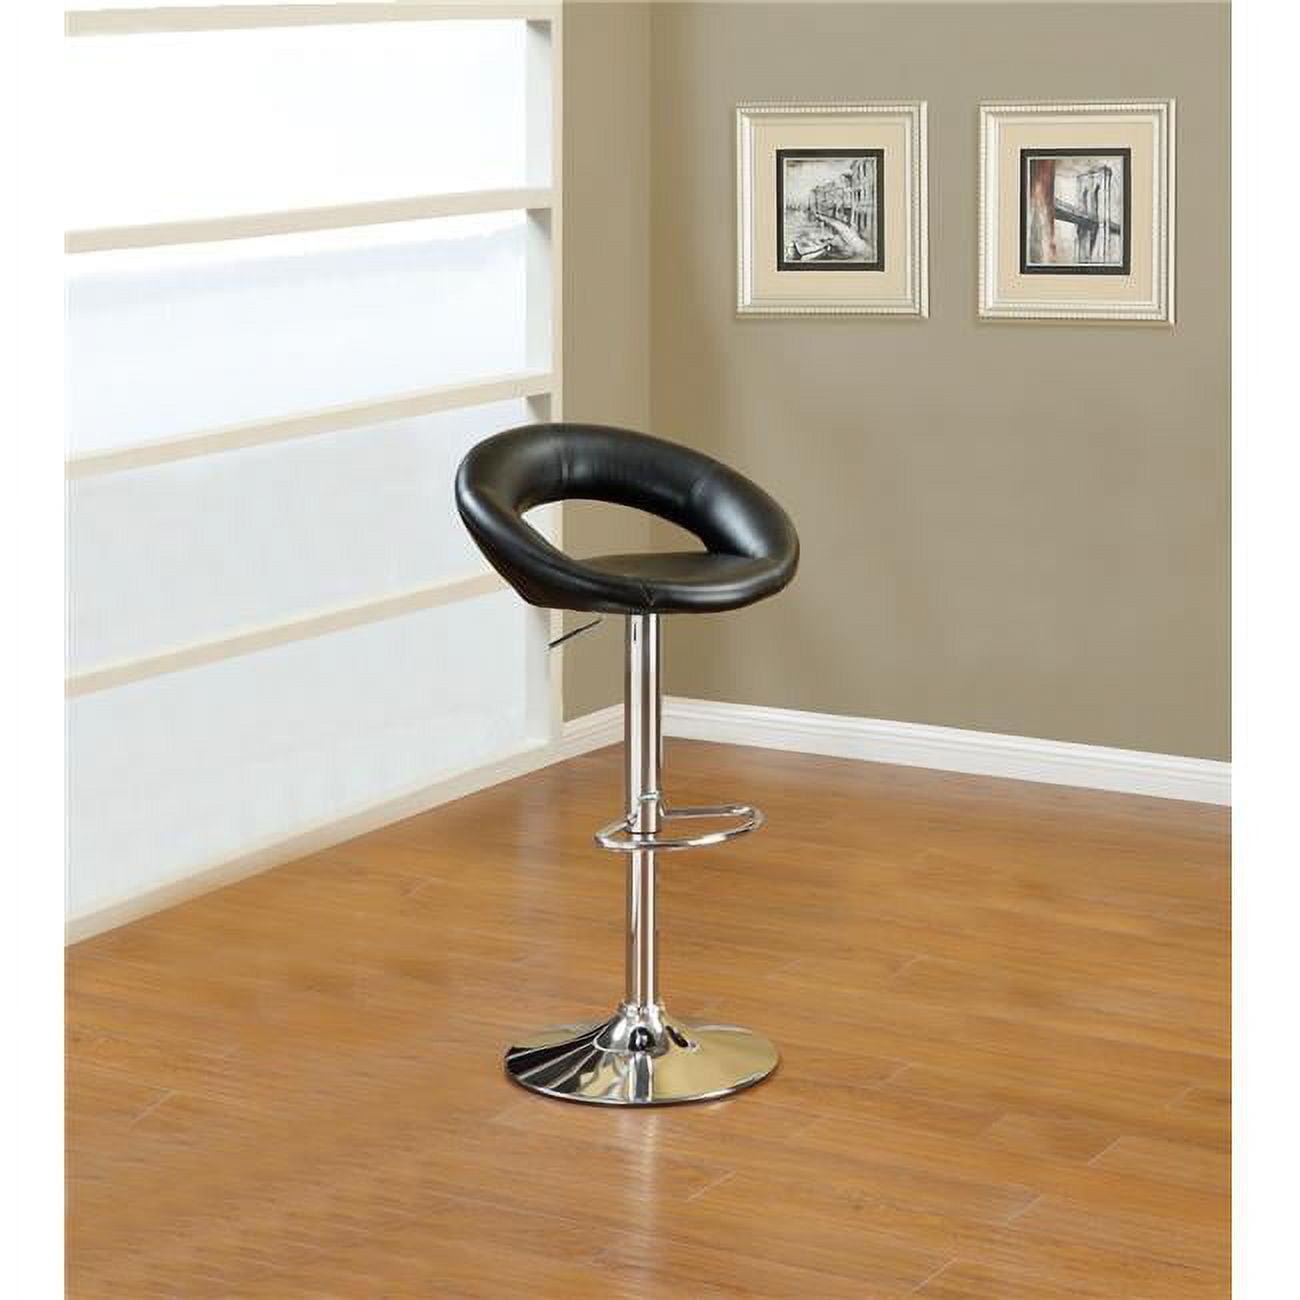 Modern Swivel Adjustable Bar Stool in Black Faux Leather and Silver Metal, Set of 2